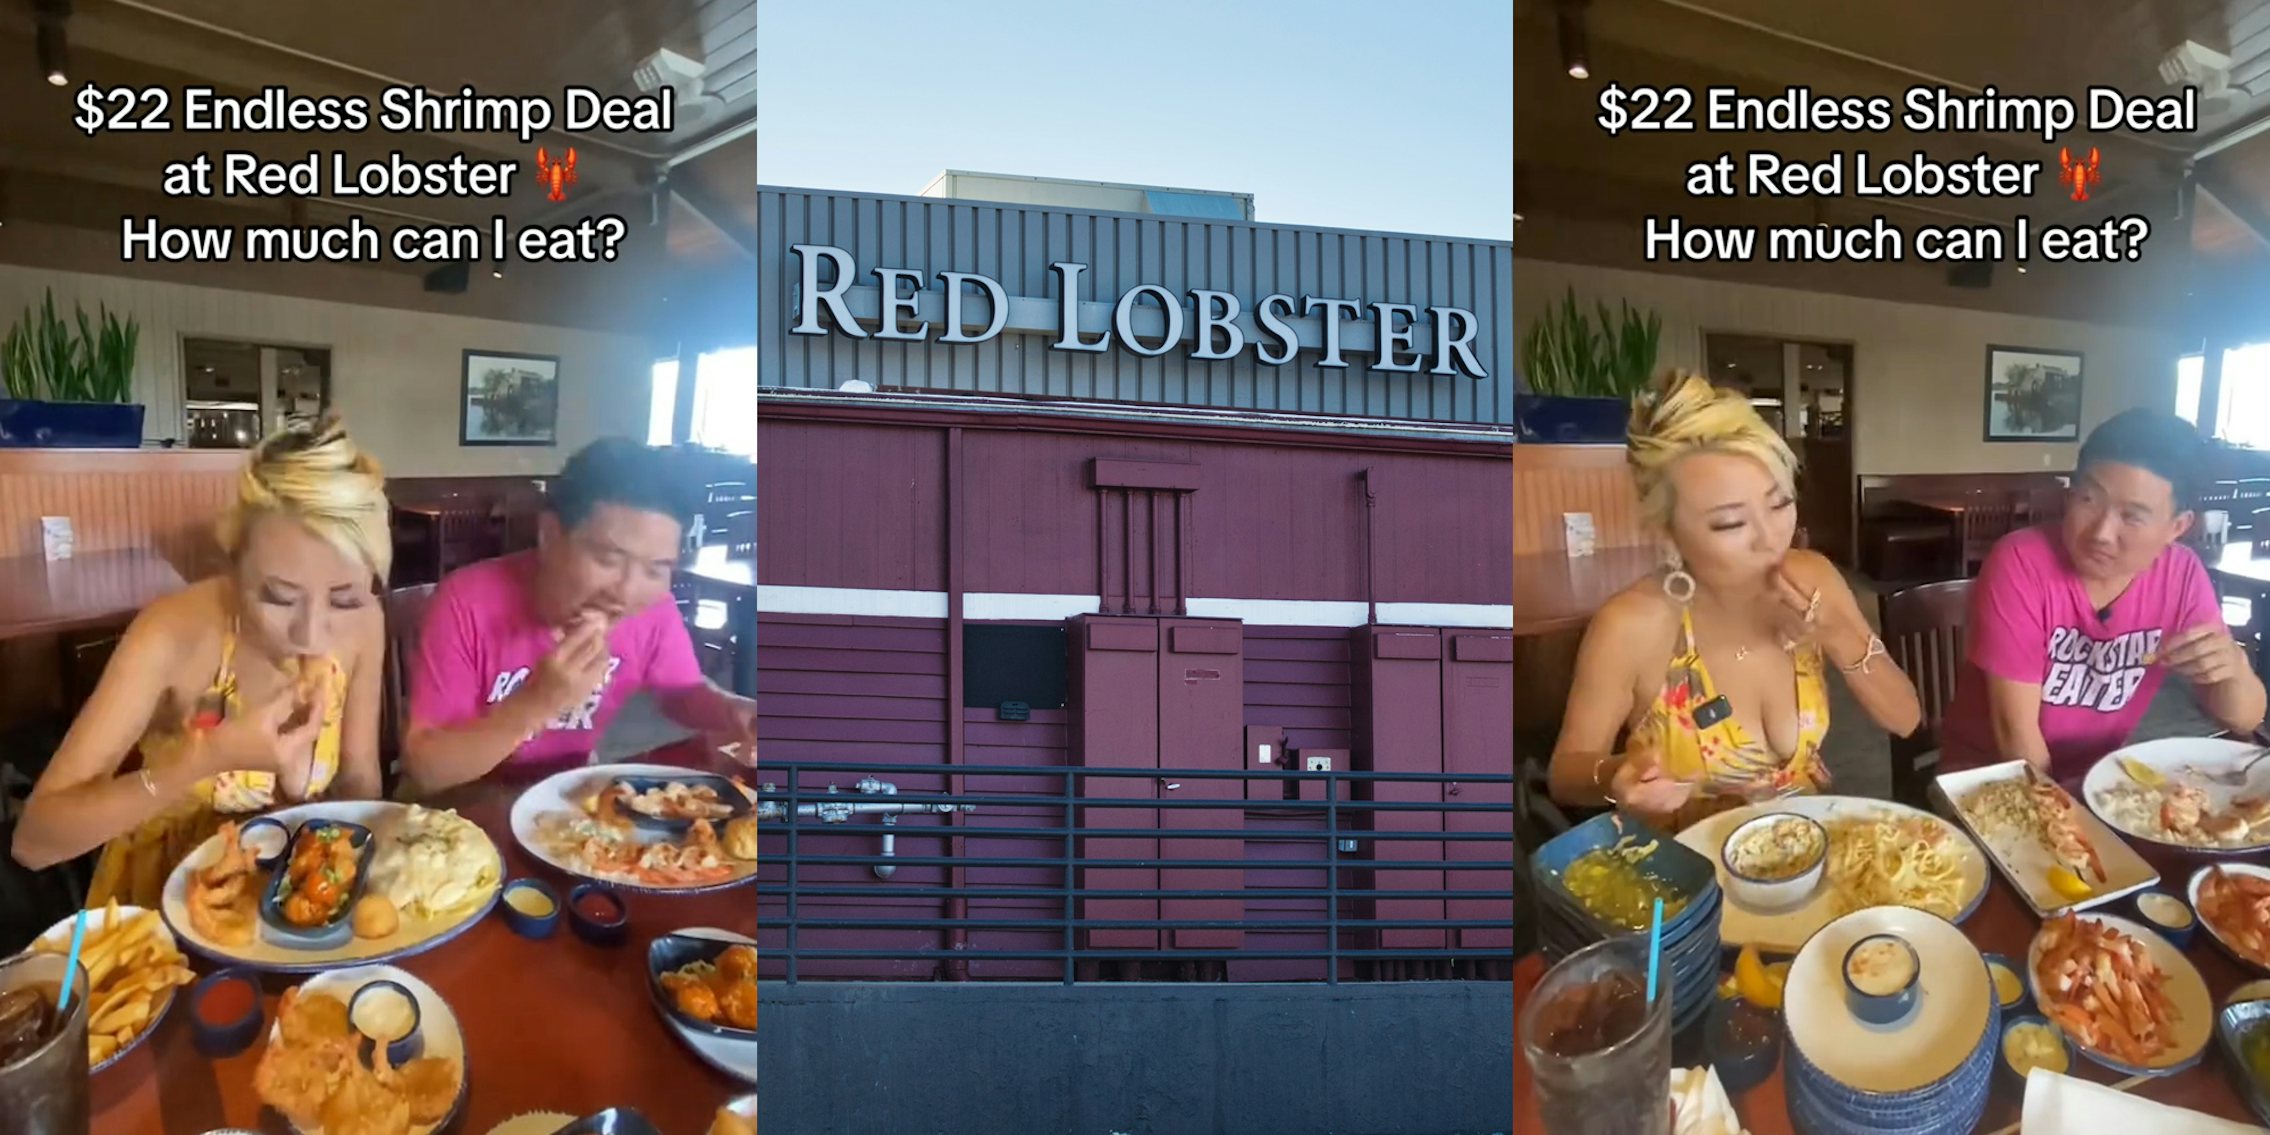 Red Lobster customers eating with caption '$22 Endless Shrimp Deal at Red Lobster How much can I eat?' (l) Red Lobster building with sign (c) Red Lobster customers eating with caption '$22 Endless Shrimp Deal at Red Lobster How much can I eat?' (r)